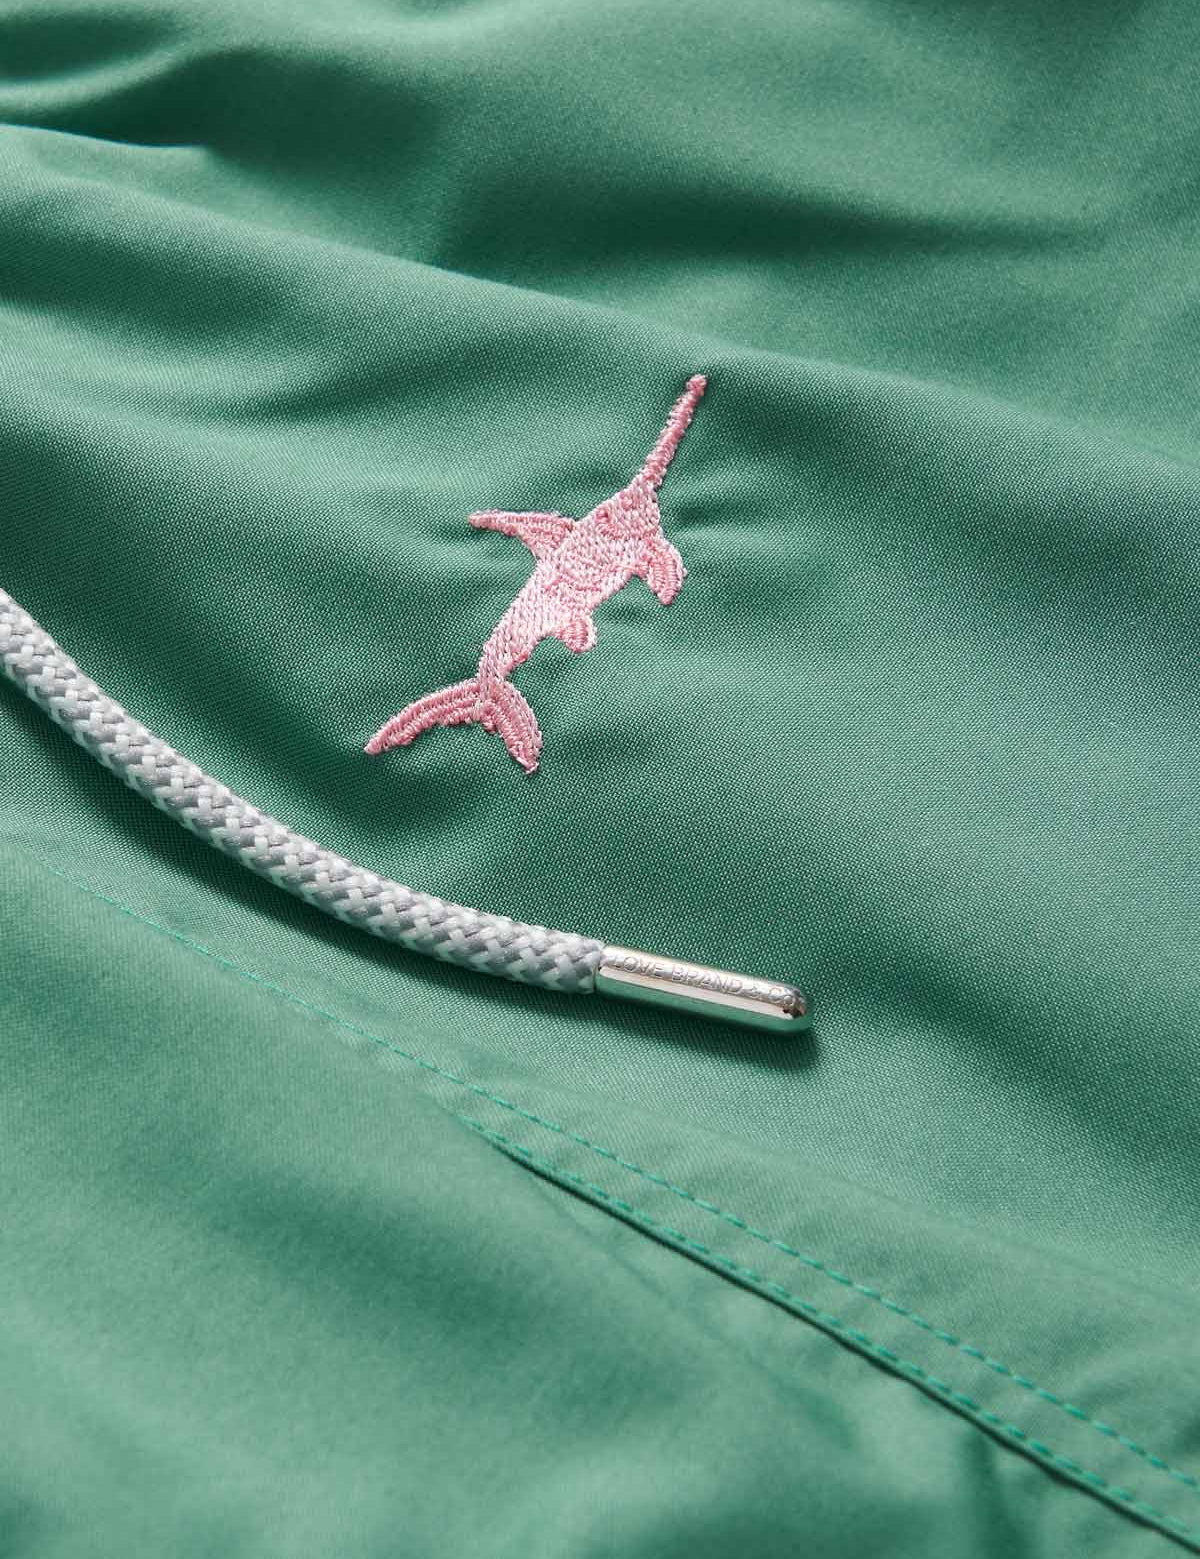 Close-up view of Men's Staniel Swim Shorts featuring pink swordfish embroidery on green fabric and braided drawstring.